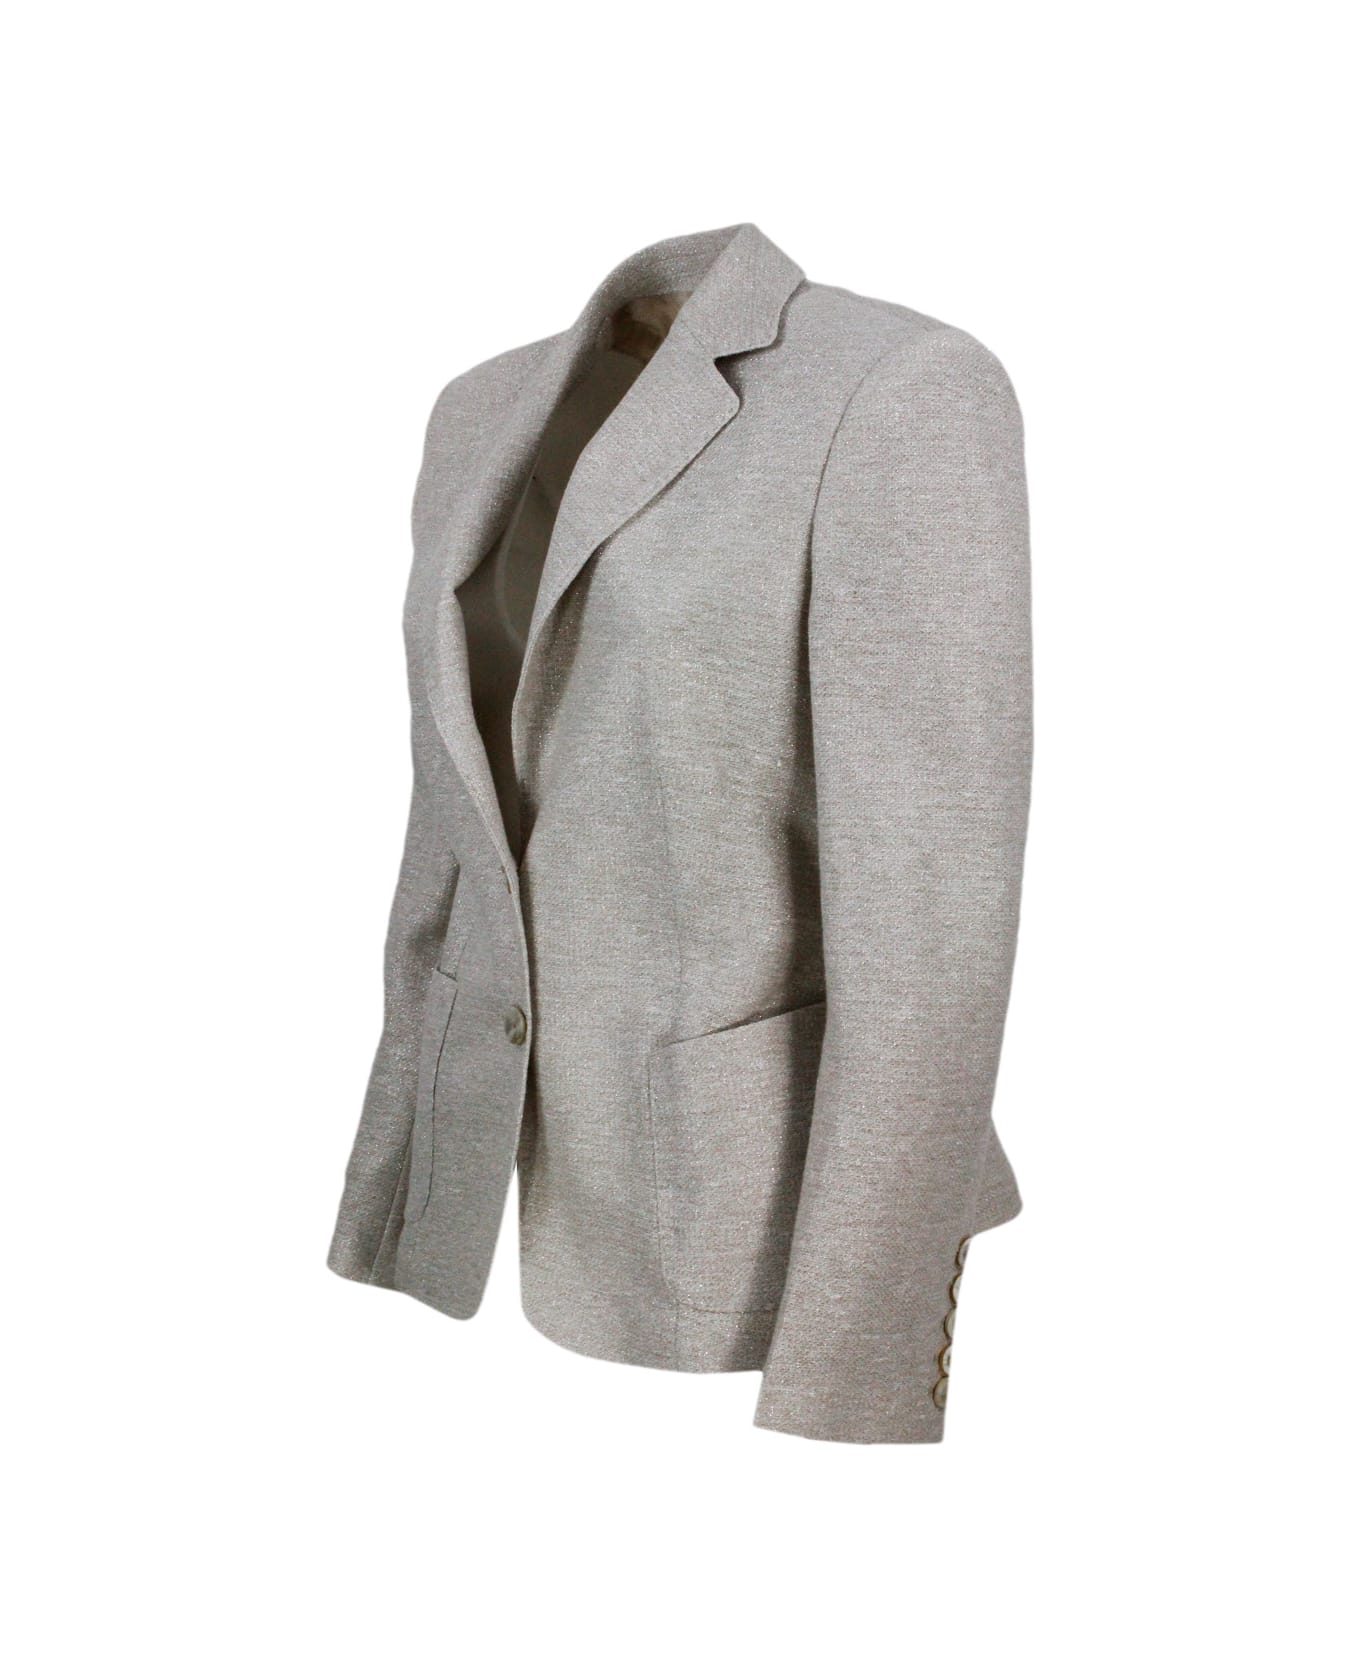 Barba Napoli Single-breasted Two-button Jacket Made Of Linen And Cotton And Embellished With Bright Lurex Threads - Gold